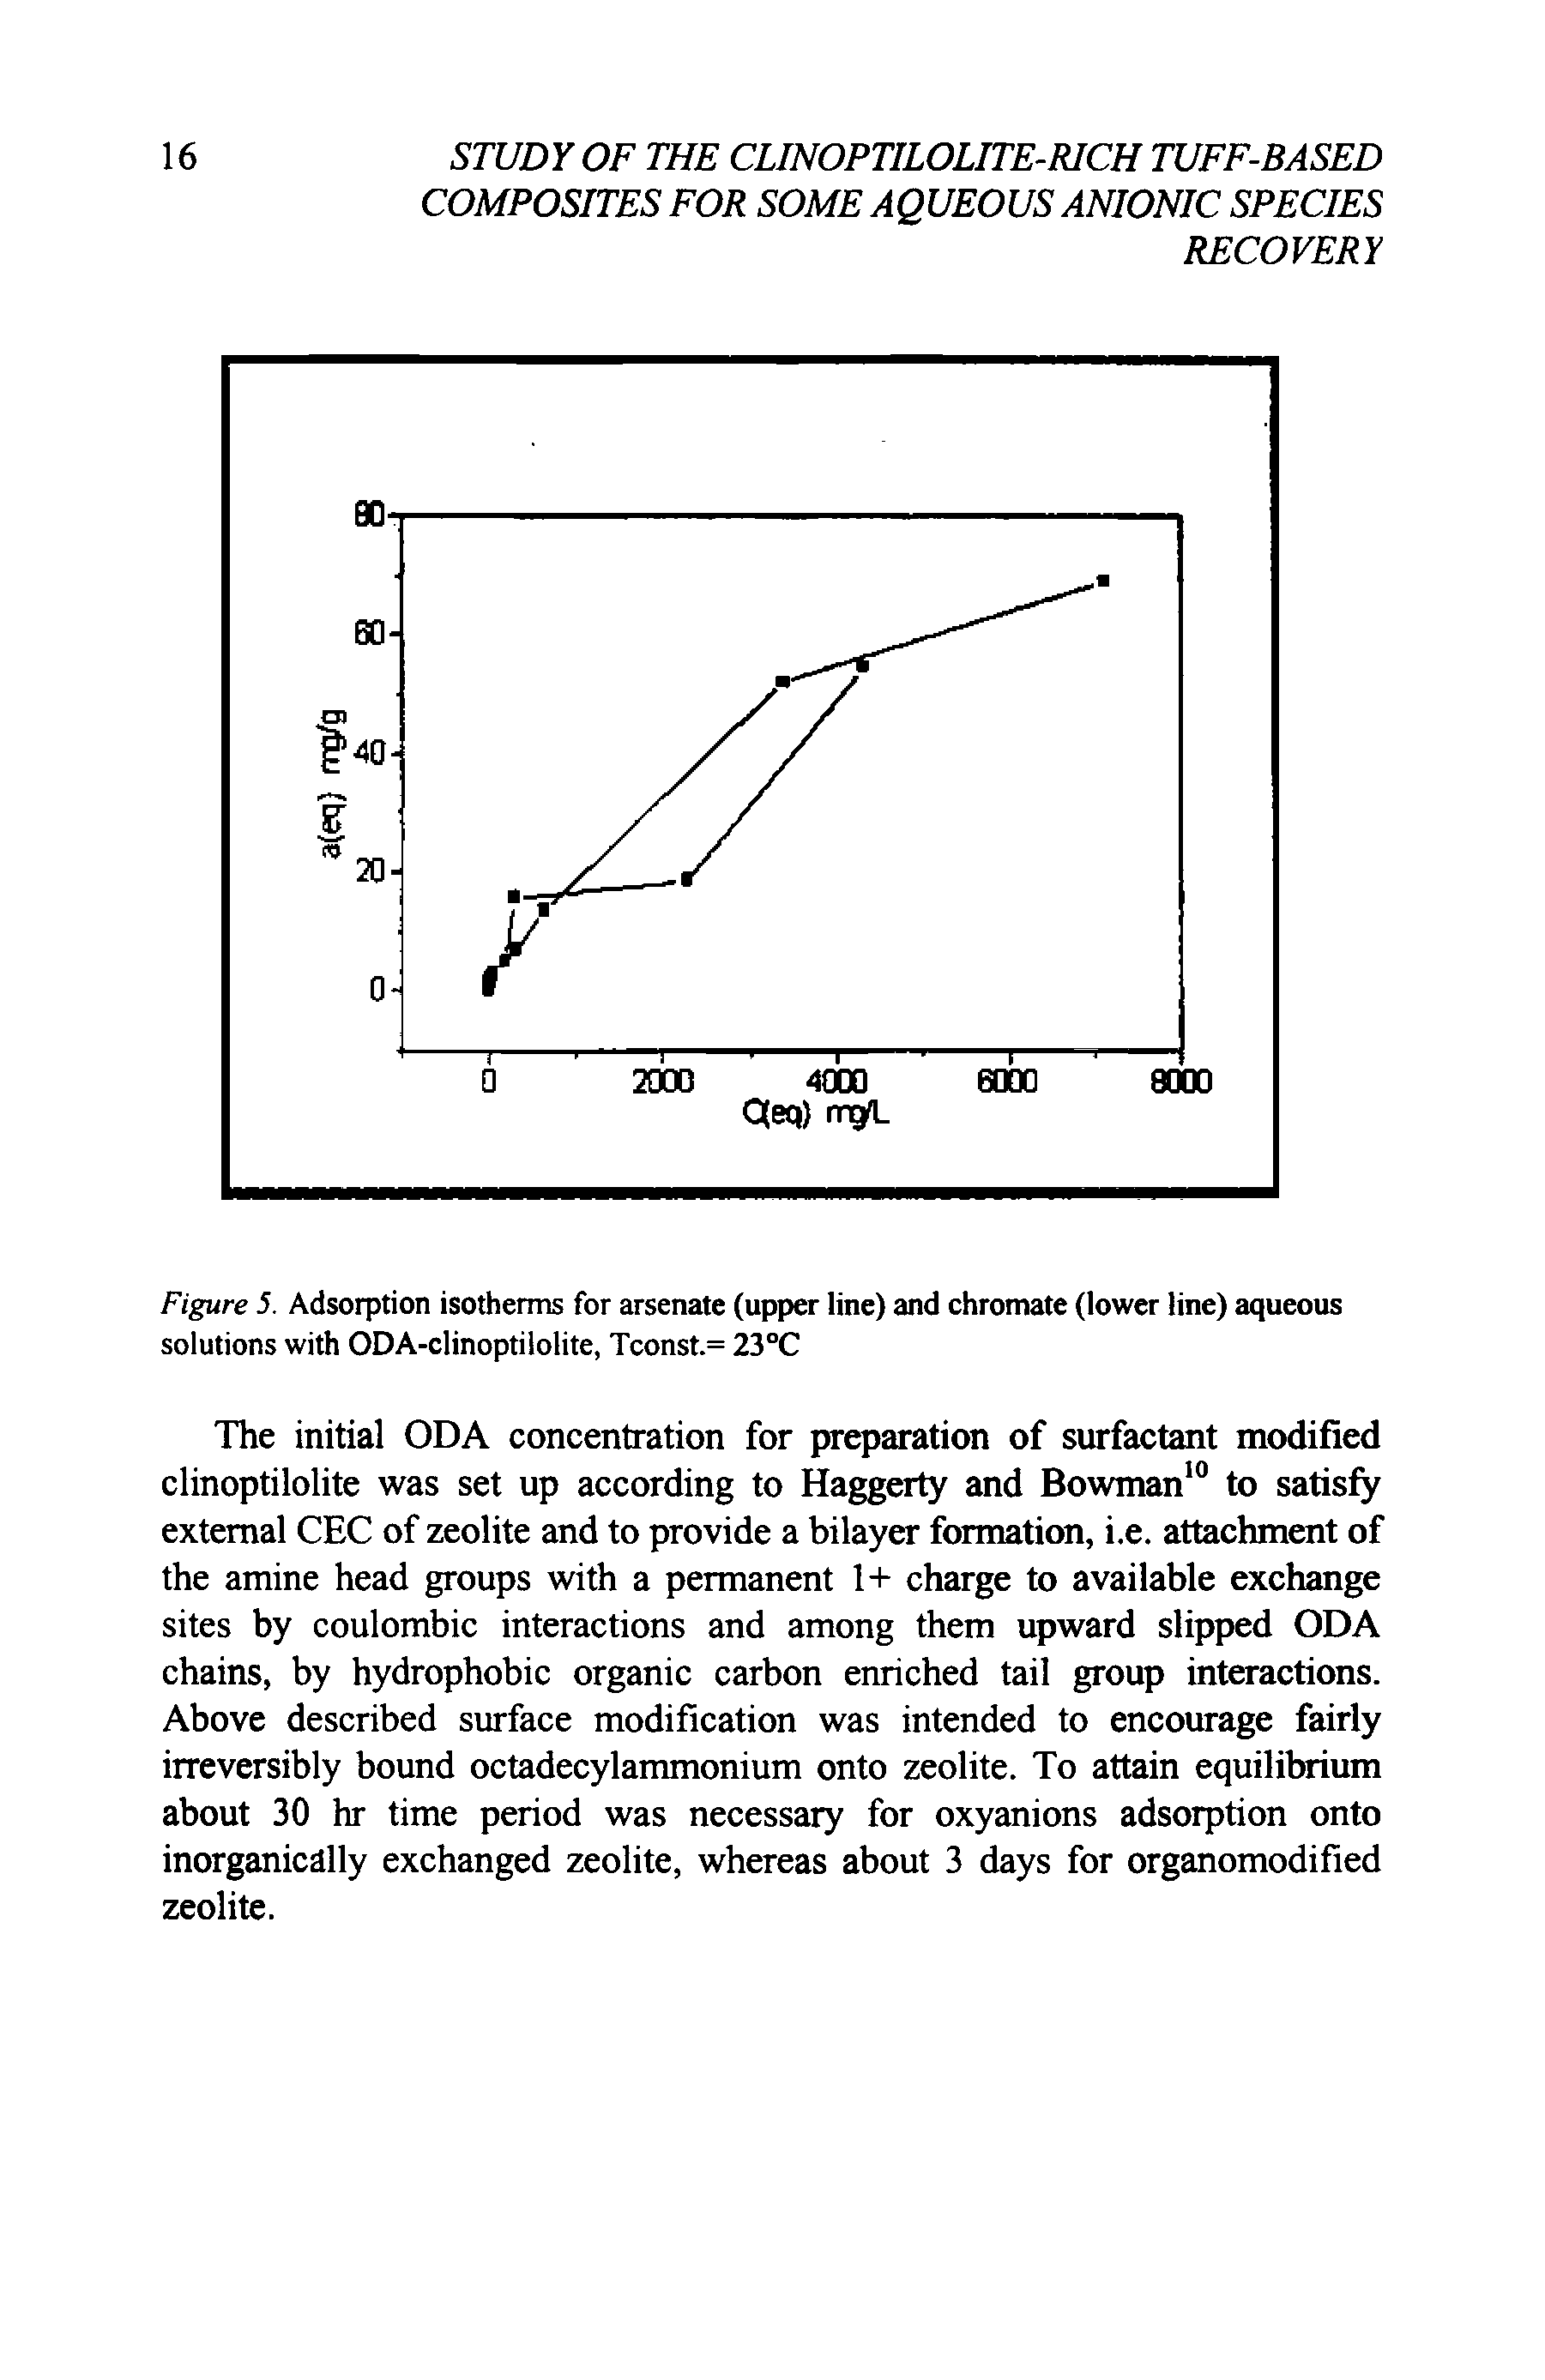 Figure 5. Adsorption isotherms for arsenate (upper line) and chromate (lower line) aqueous solutions with ODA-clinoptilolite, Tconst.= 23°C...